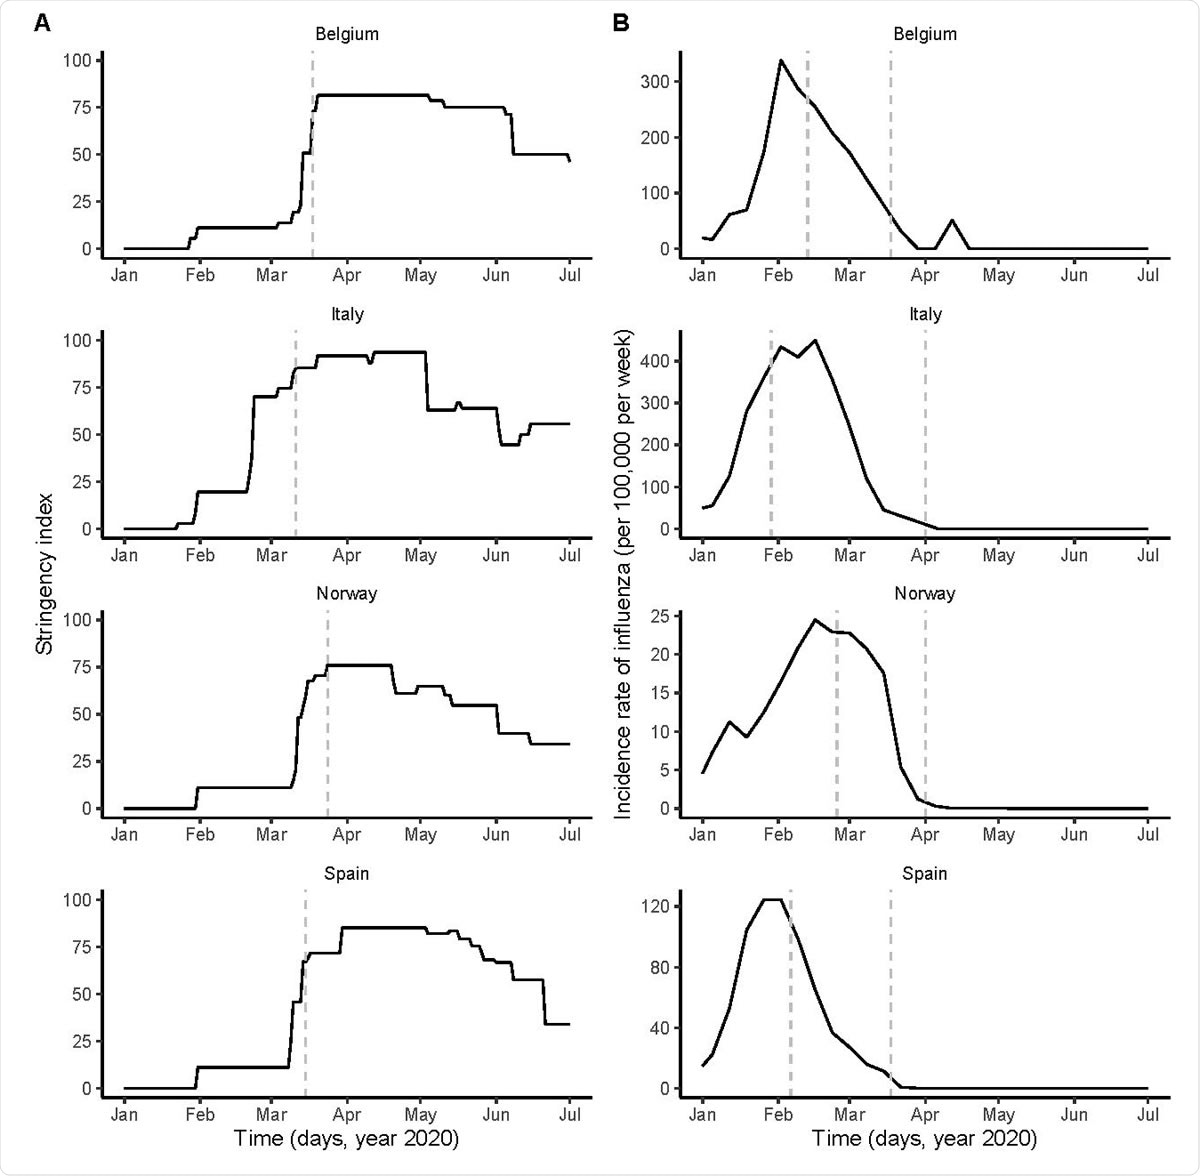 Potential drivers of SARS-CoV-2 transmission in Belgium, Italy, Norway, and Spain. A: time plot of the stringency index, a country-level aggregate measure of the number and of the strictness of non-pharmaceutical control measures implemented by governments. The vertical dashed line indicates the start of the nationwide lockdown [16]. B: time plot of influenza incidence, calculated as the product of the incidence of influenza-like illnesses and of the fraction of samples positive to any influenza virus (see also Fig. S1 for a time plot of the latter two variables). The vertical dashed lines delimitate the period of overlap between SARS-CoV-2 and influenza, defined as the period between the assumed start date of SARS-CoV- 2 community transmission and 6 weeks after the epidemic peak of influenza [46]. In each country, the time series displayed were incorporated as covariates, which modulated the transmission rate of SARS-CoV-2 in our model (see Methods). In B, the y-axis values differ for each panel.